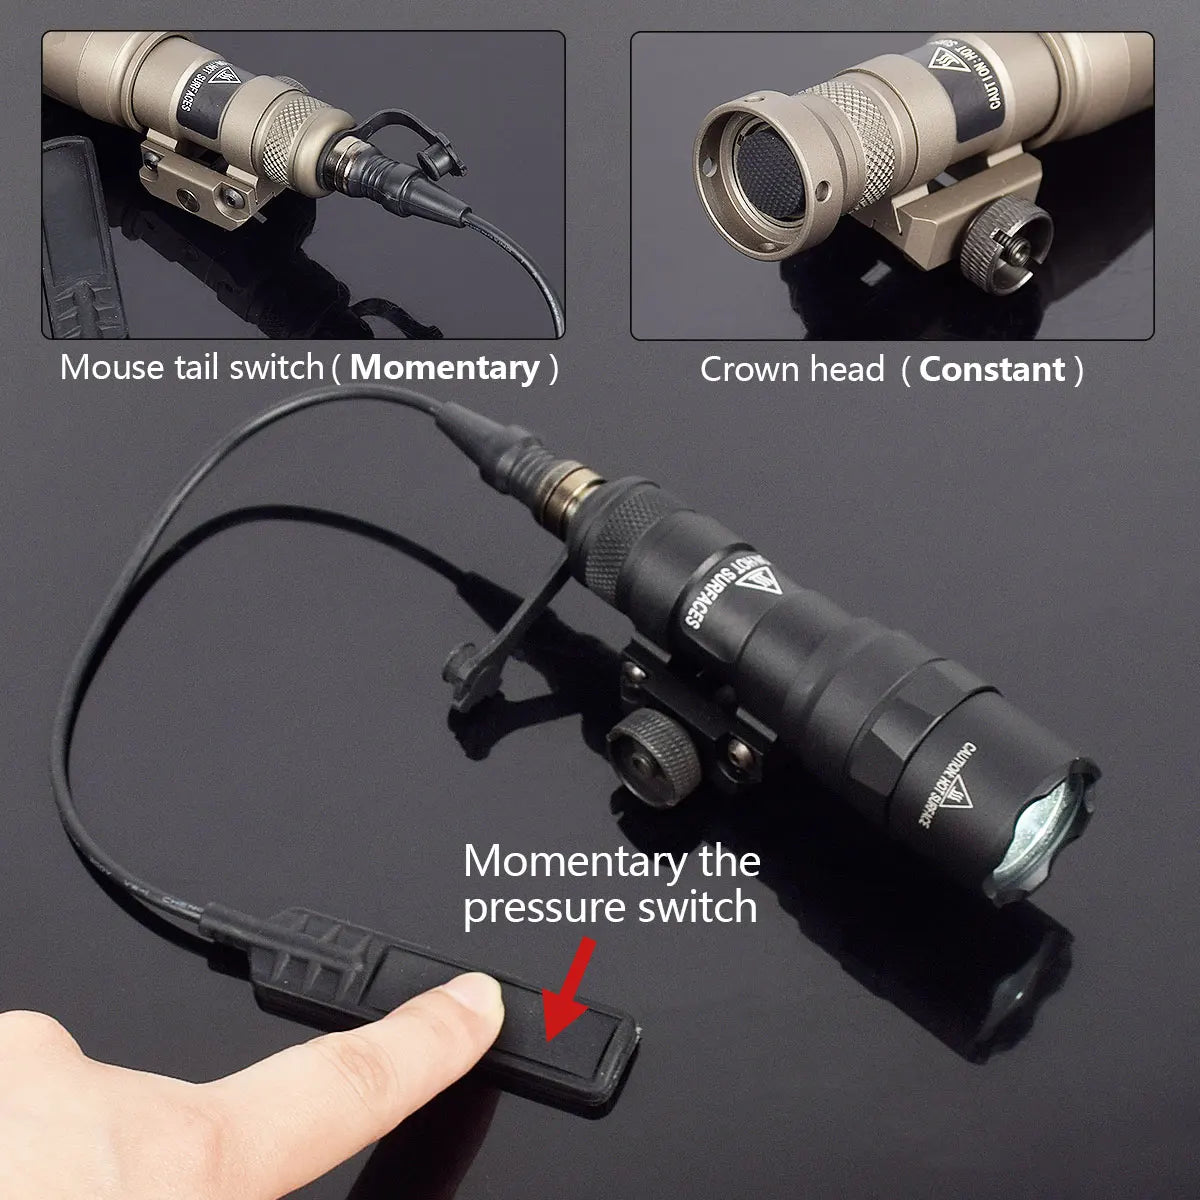 Tactical flashlight with momentary pressure switch and crown head features.